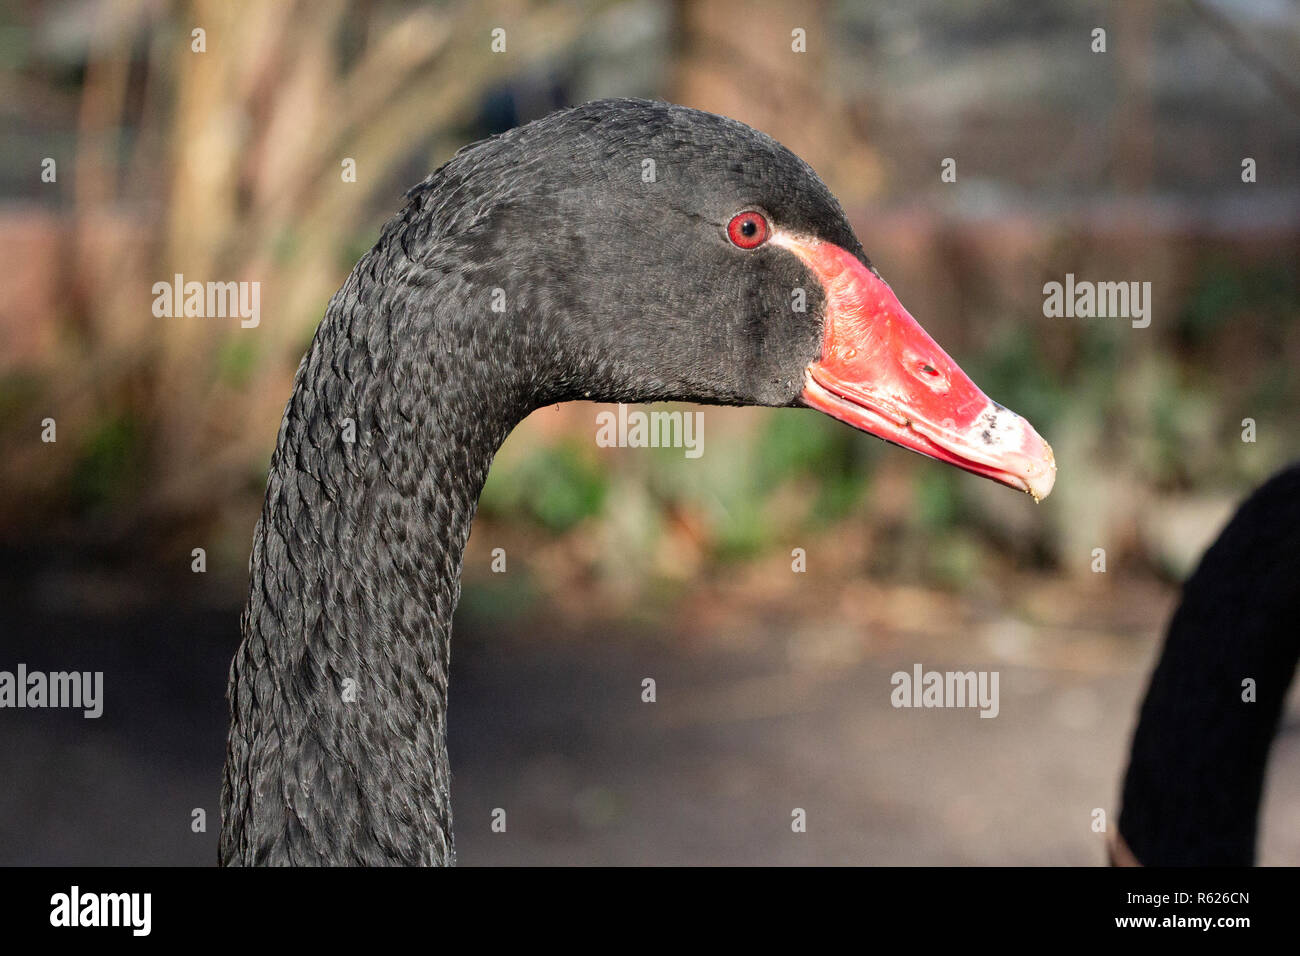 Close up portrait of a black swan with red beak and red eyes with blurry background. Stock Photo